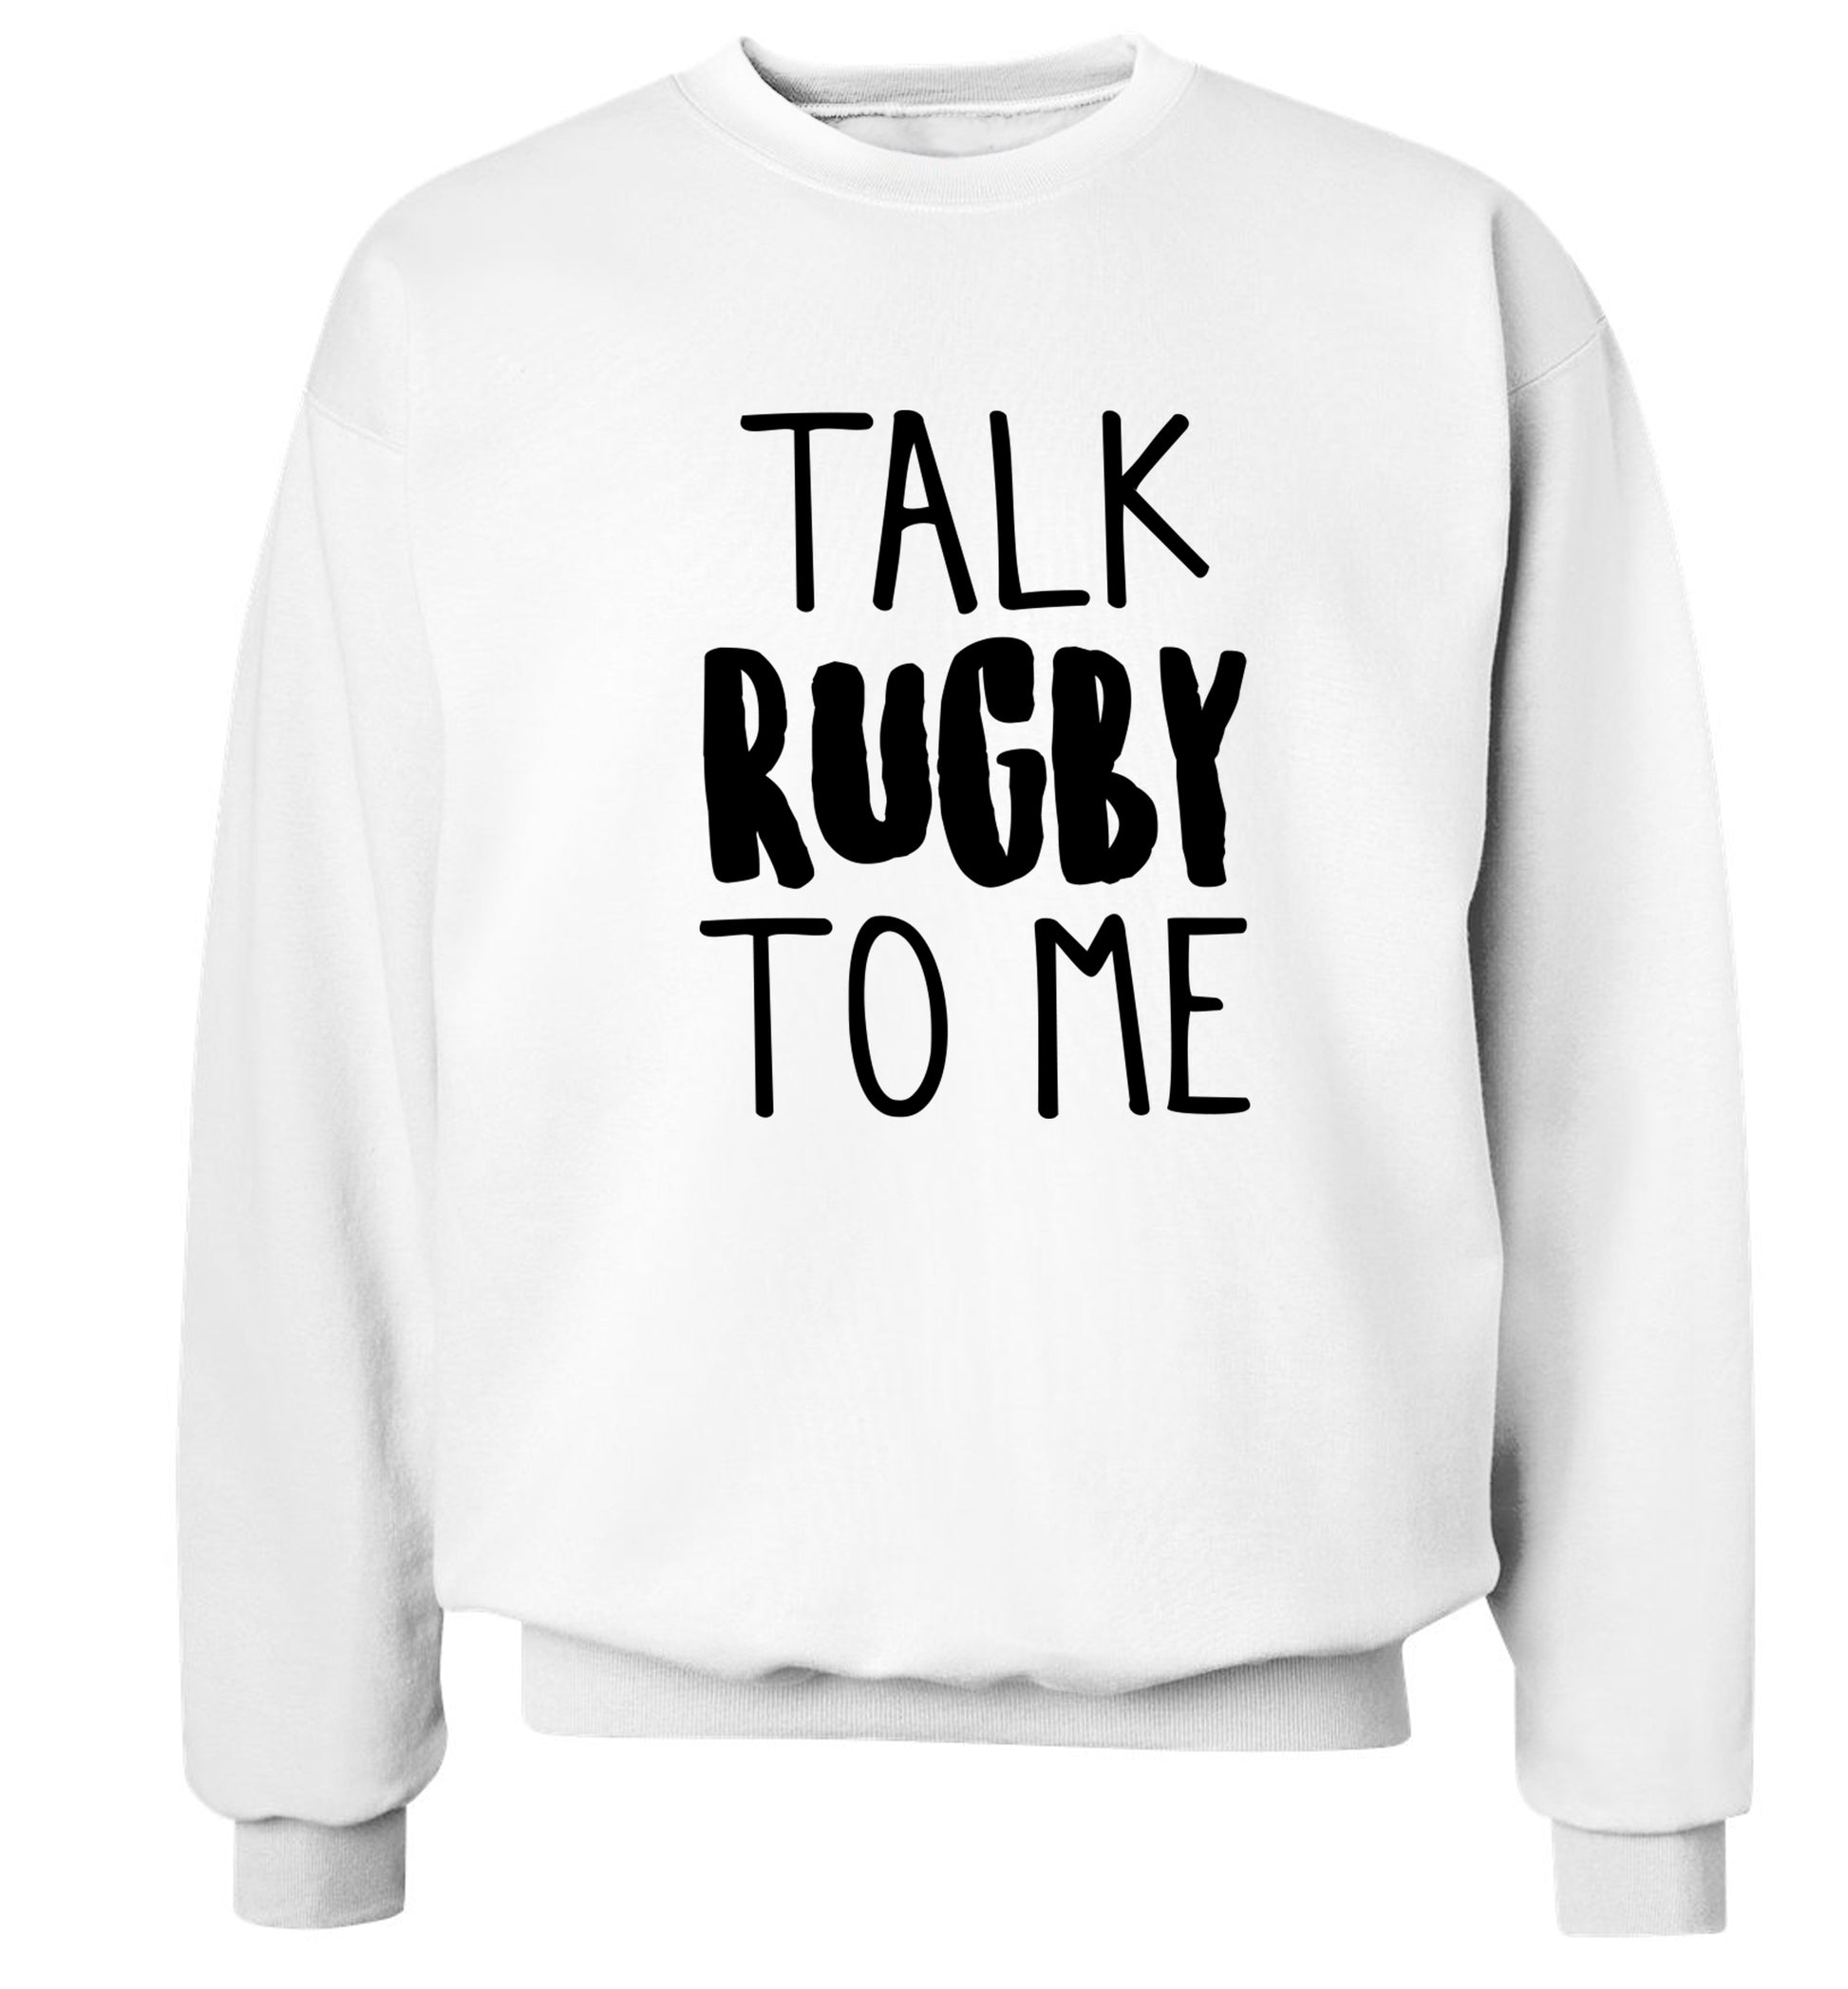 Talk rugby to me Adult's unisex white Sweater 2XL